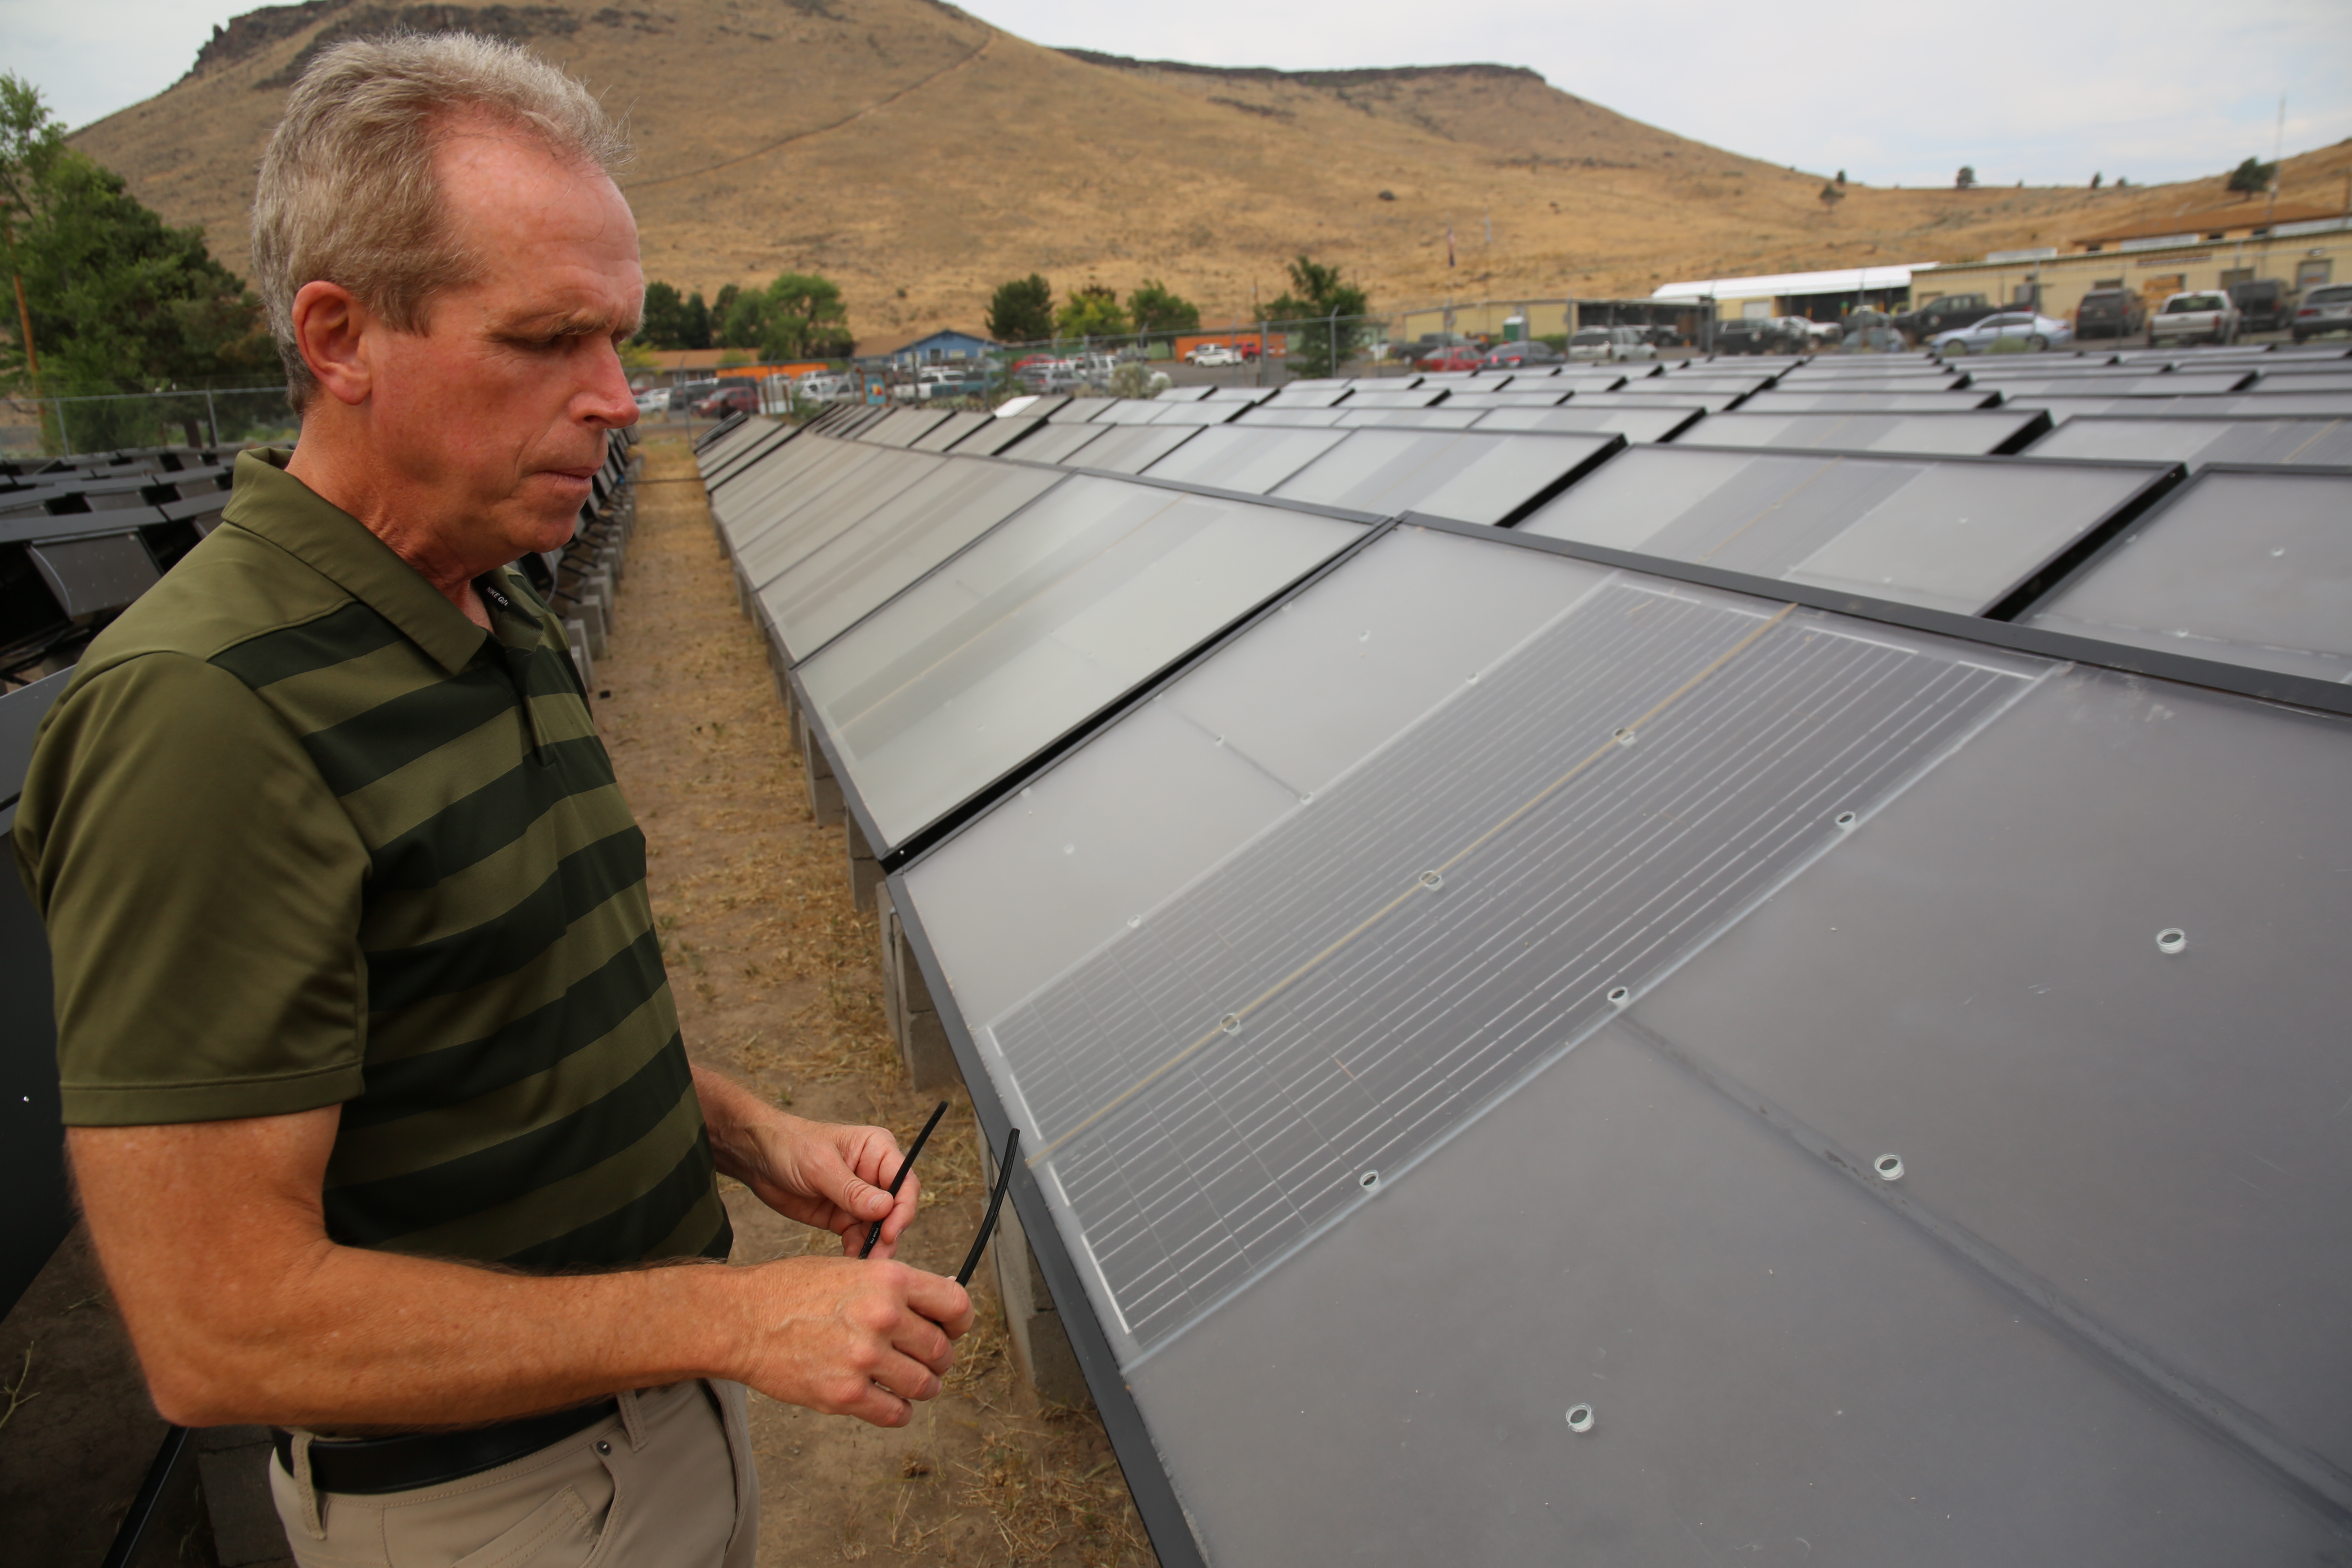 Warm Springs Economic Development Corporation CEO Jim Souers, pictured June 21, 2021, says the hyrdo panels should last 10-15 years, and applauds the technology as largely self-sustaining: 